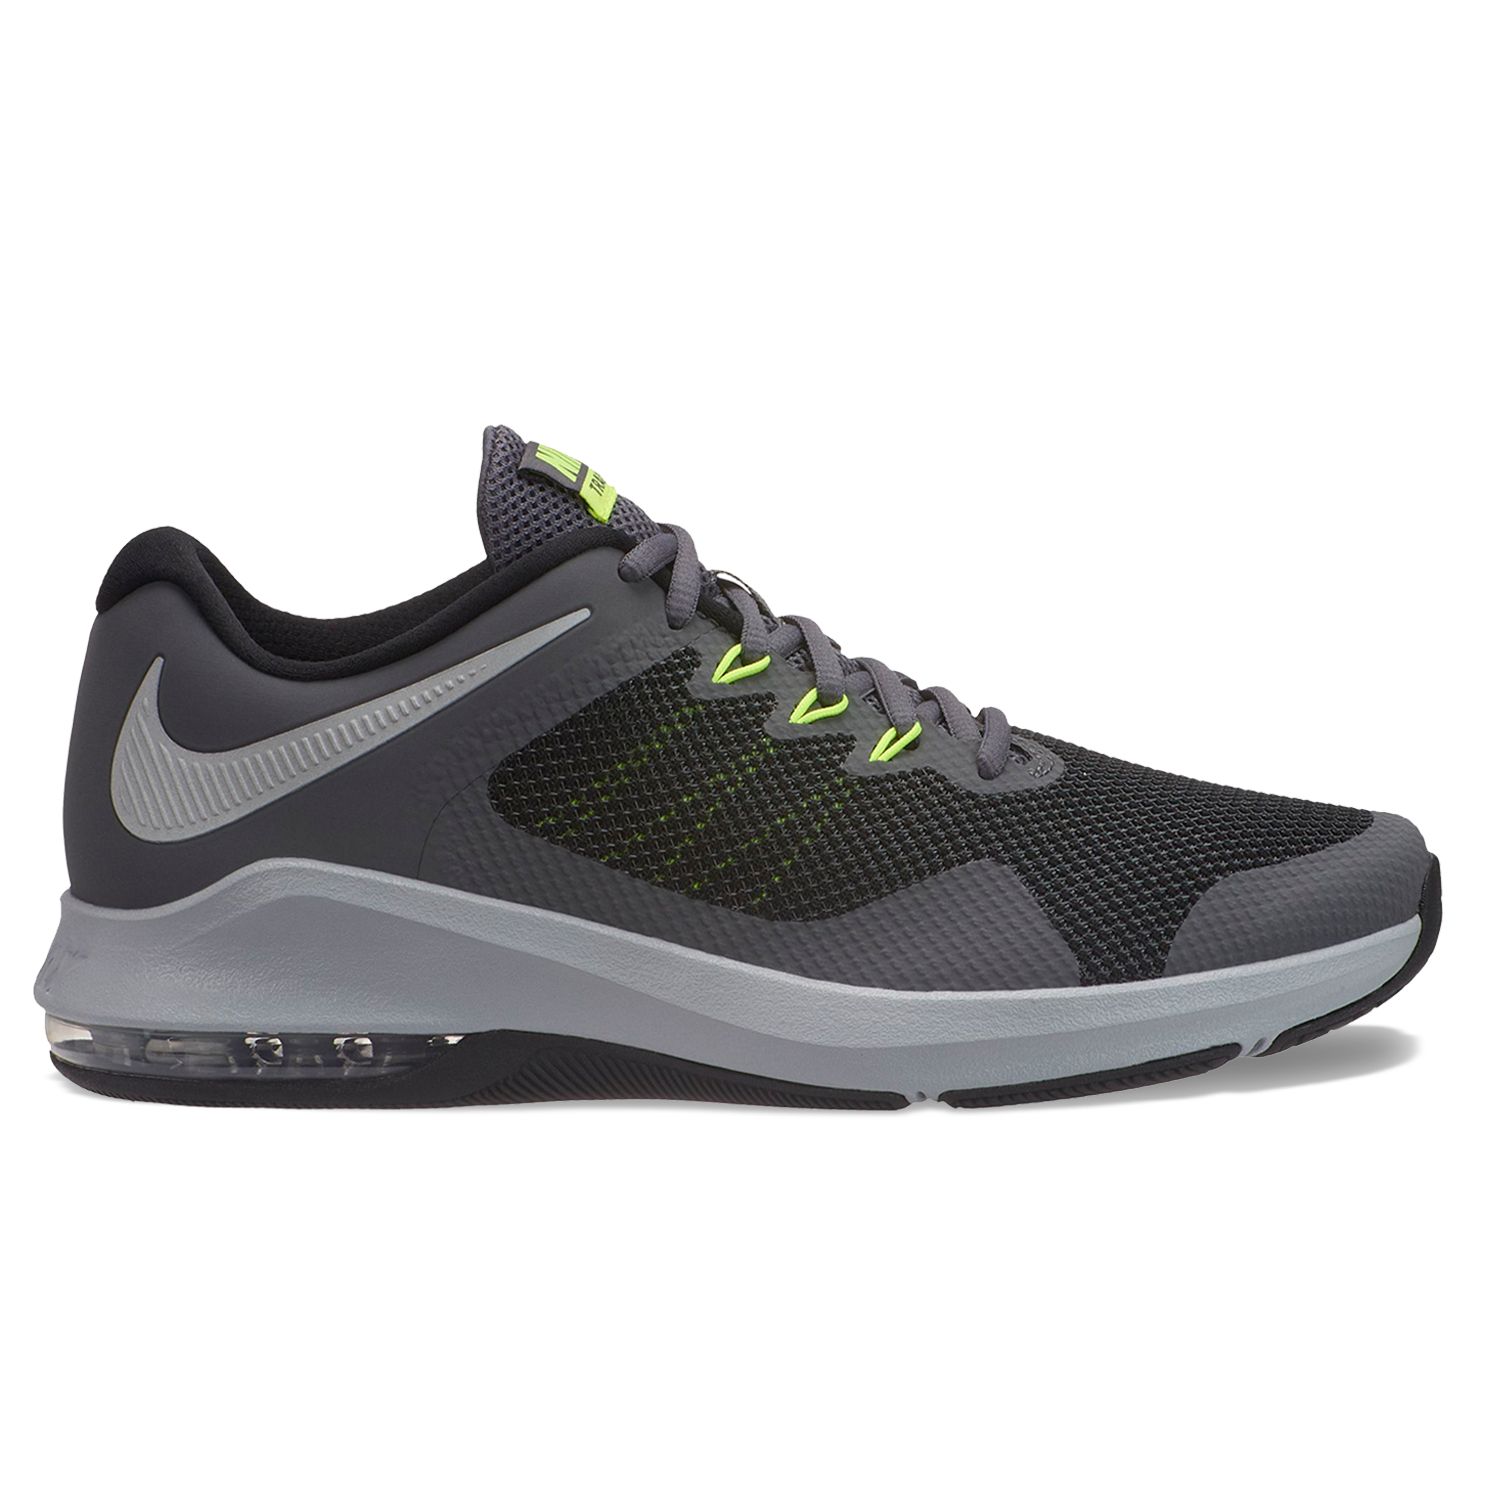 nike shoes clearance sale online